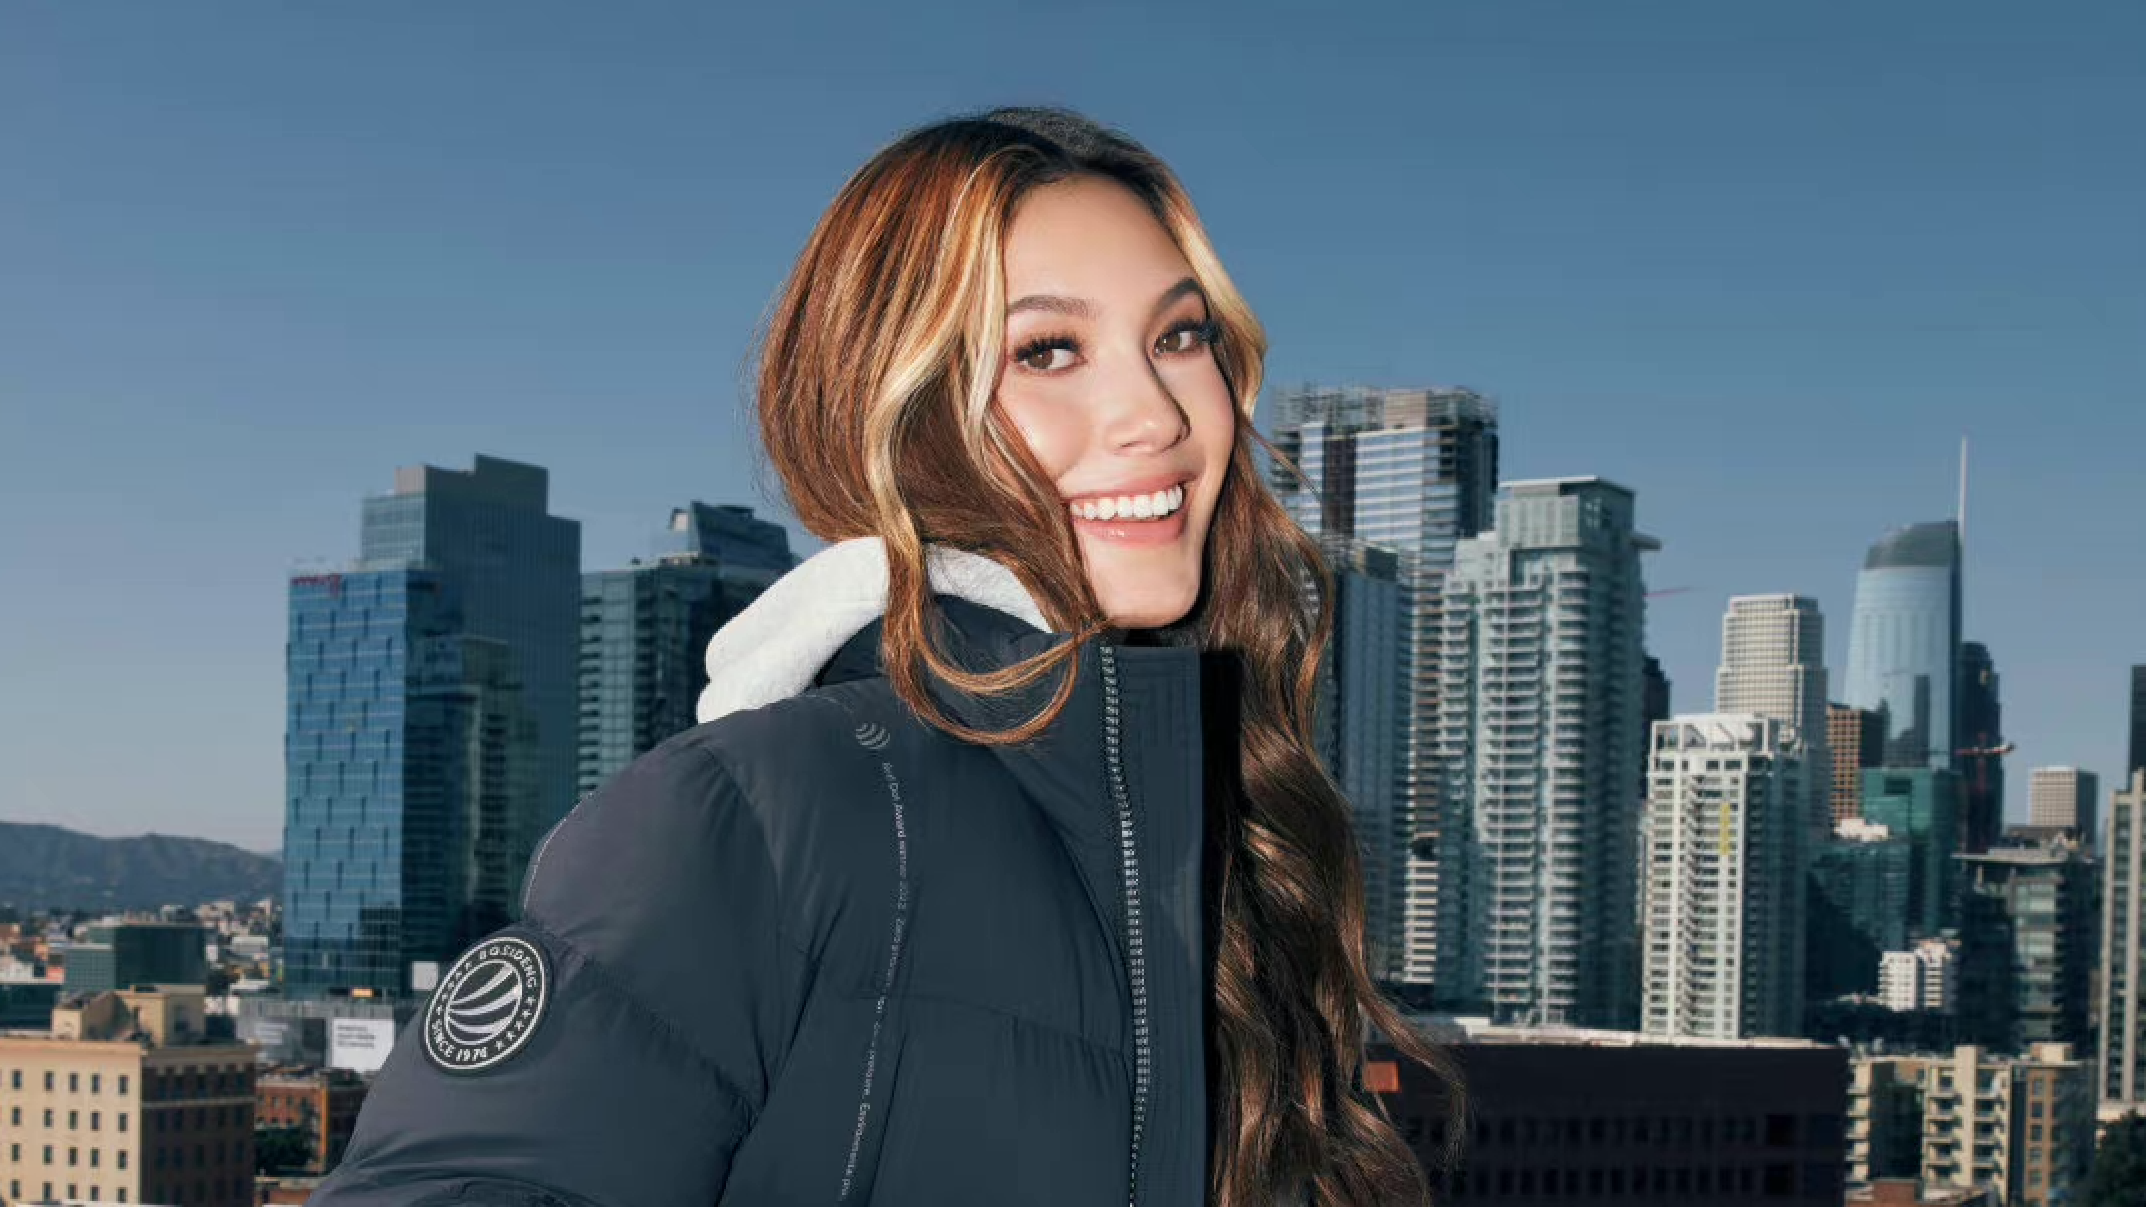 Domestic Chinese and international puffer jacket brands are battling for market share in the mainland. We take a look at which names are emerging victorious. Photo: Bosideng